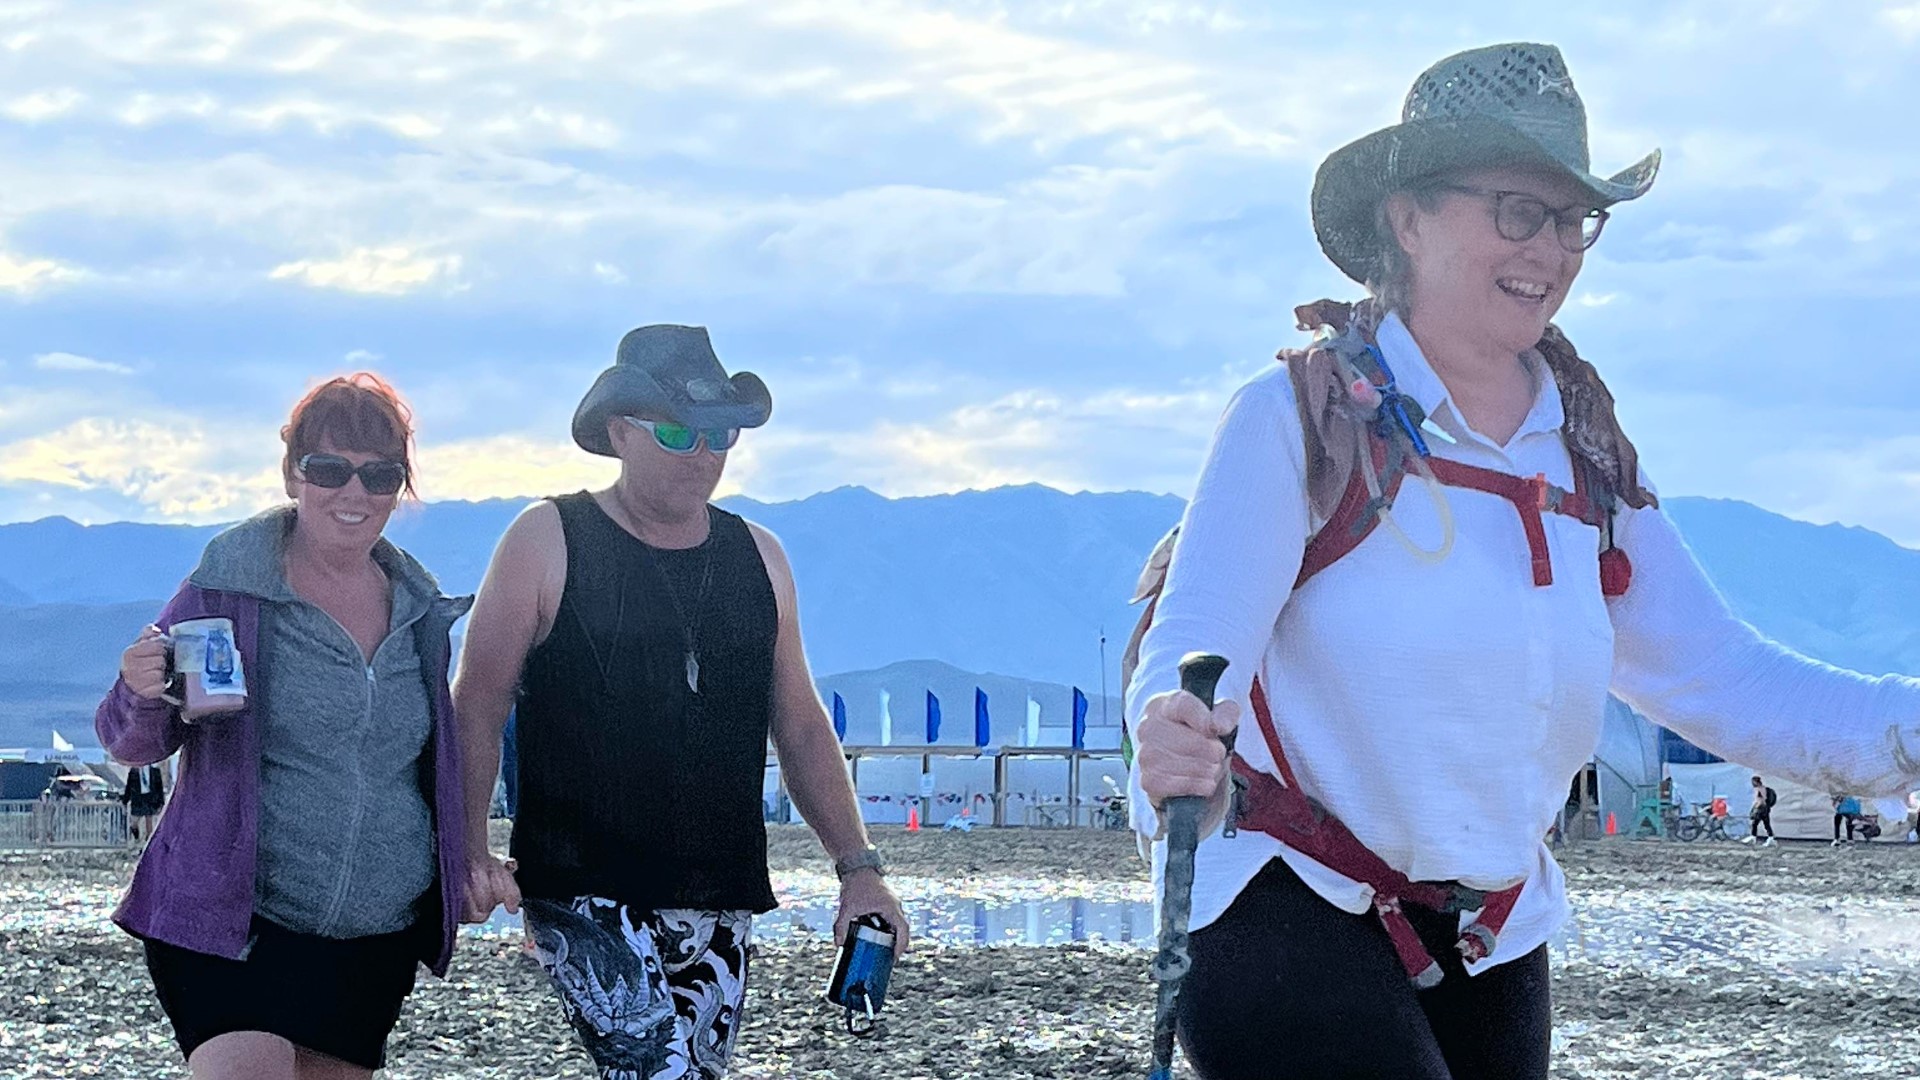 Heavy rain and muddy conditions make it difficult for Sacramento-area residents to navigate in and out of Burning Man event.